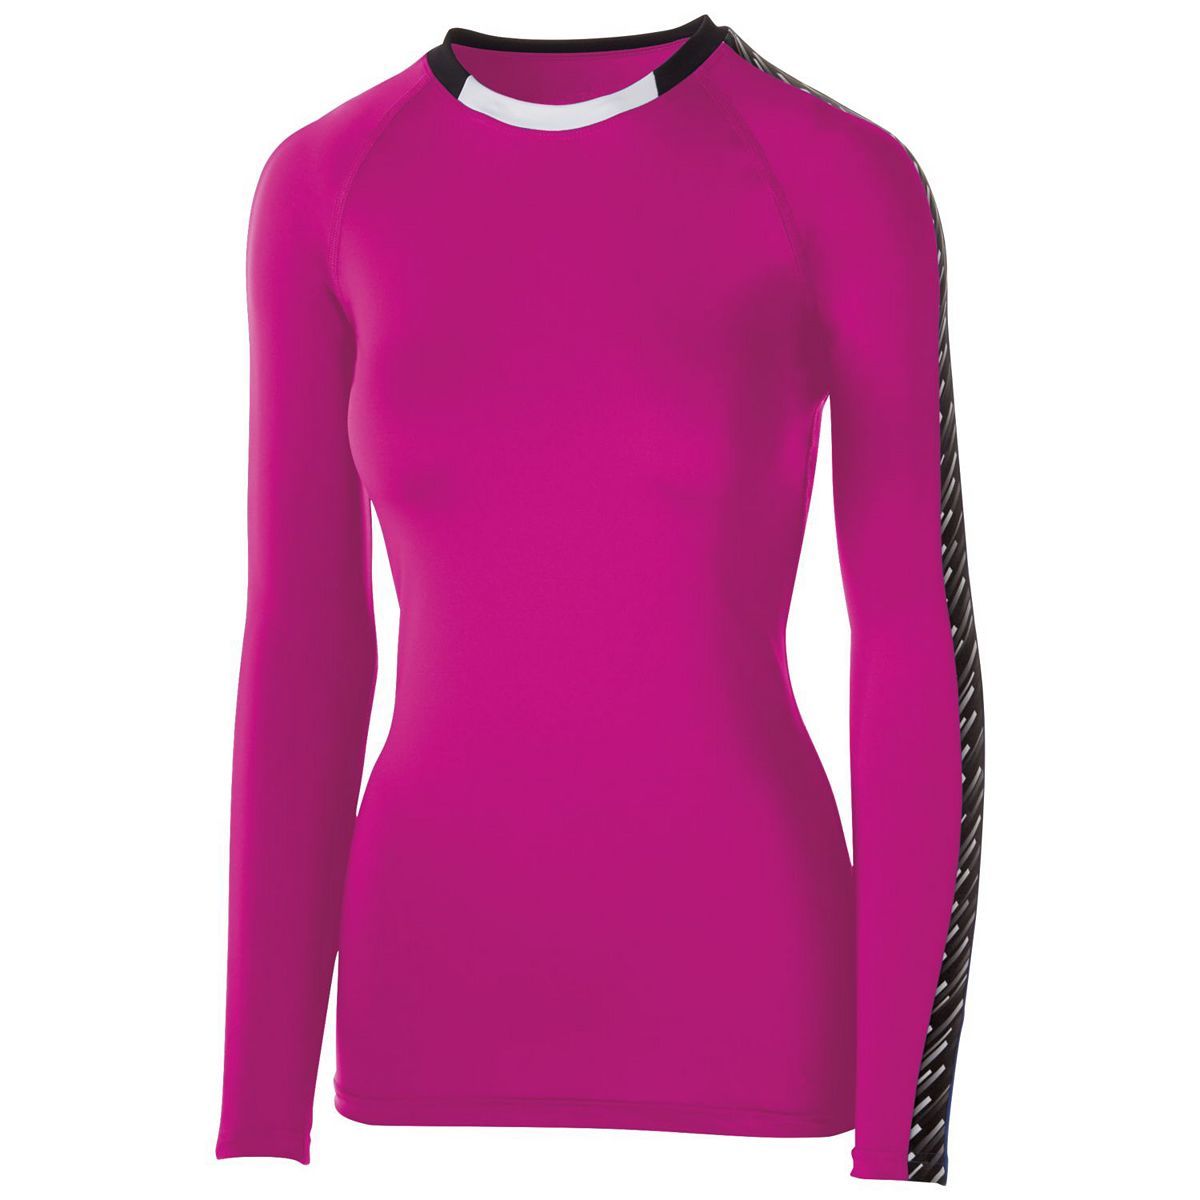 High 5 Girls Spectrum Long Sleeve Jersey in Raspberry/Black/White  -Part of the Girls, High5-Products, Volleyball, Girls-Jersey, Shirts product lines at KanaleyCreations.com